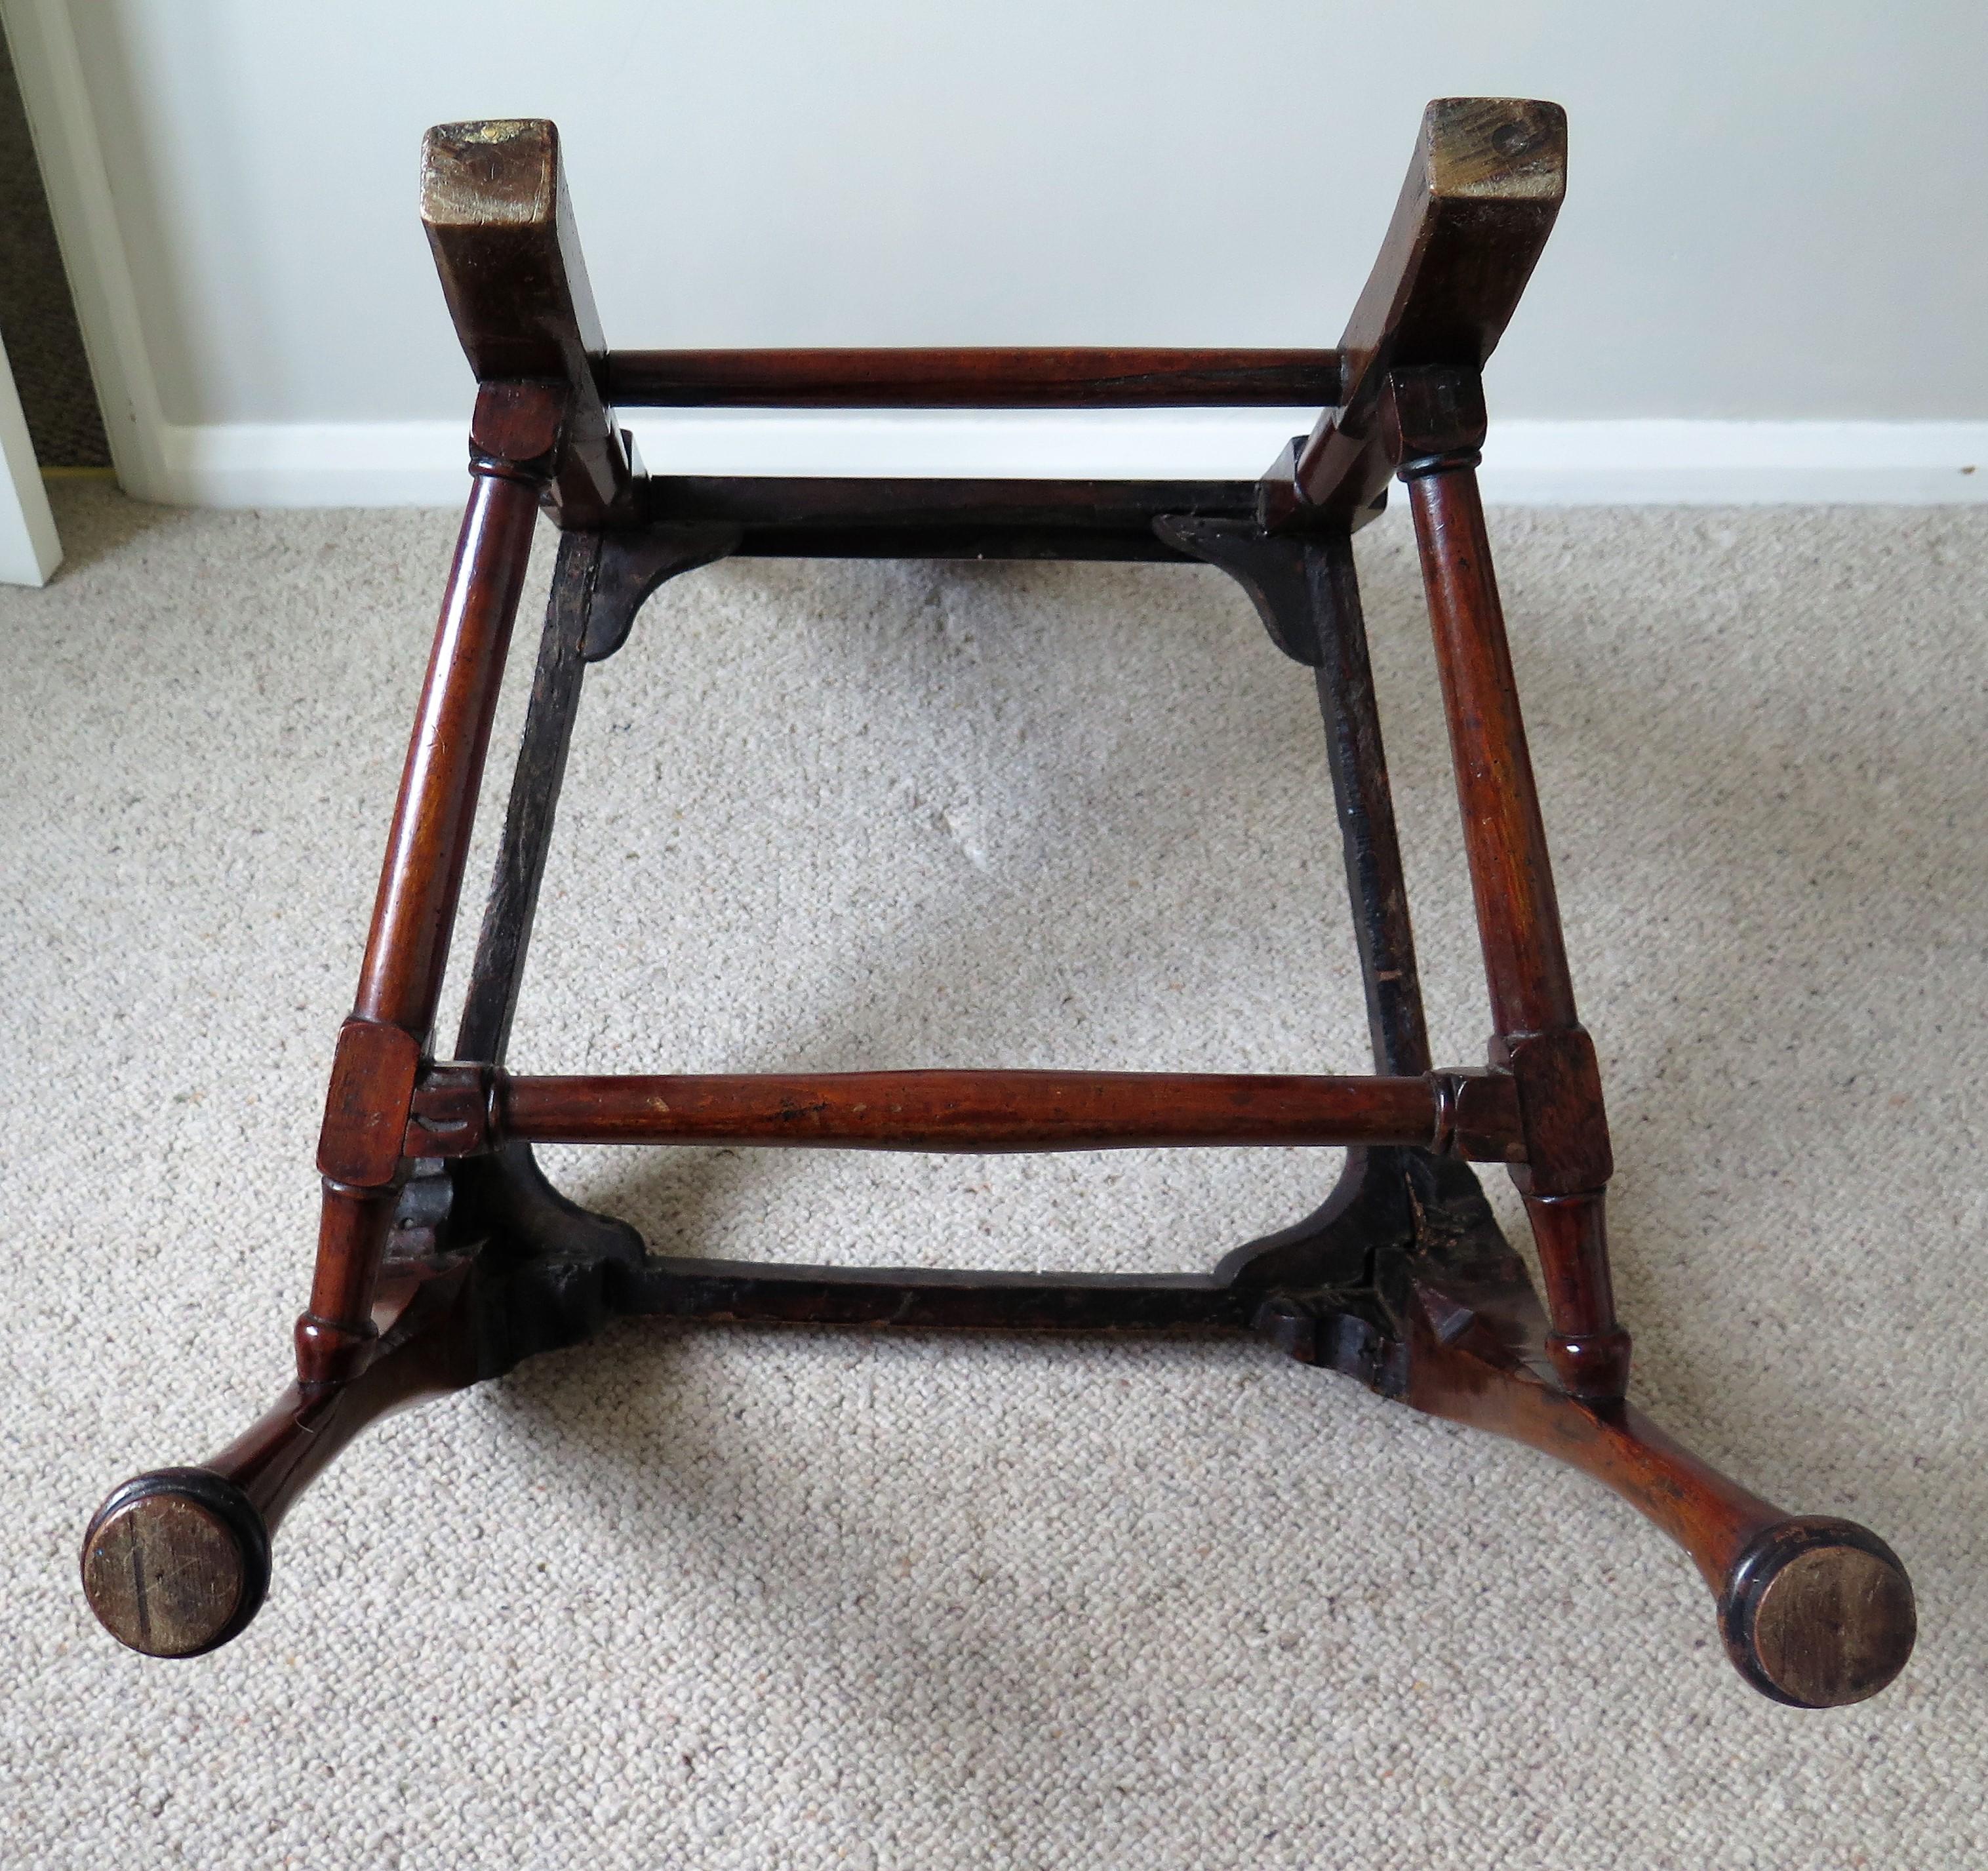 Queen Anne Period Walnut Chair Cabriole Legs and Stretchers, English circa 1700 For Sale 12